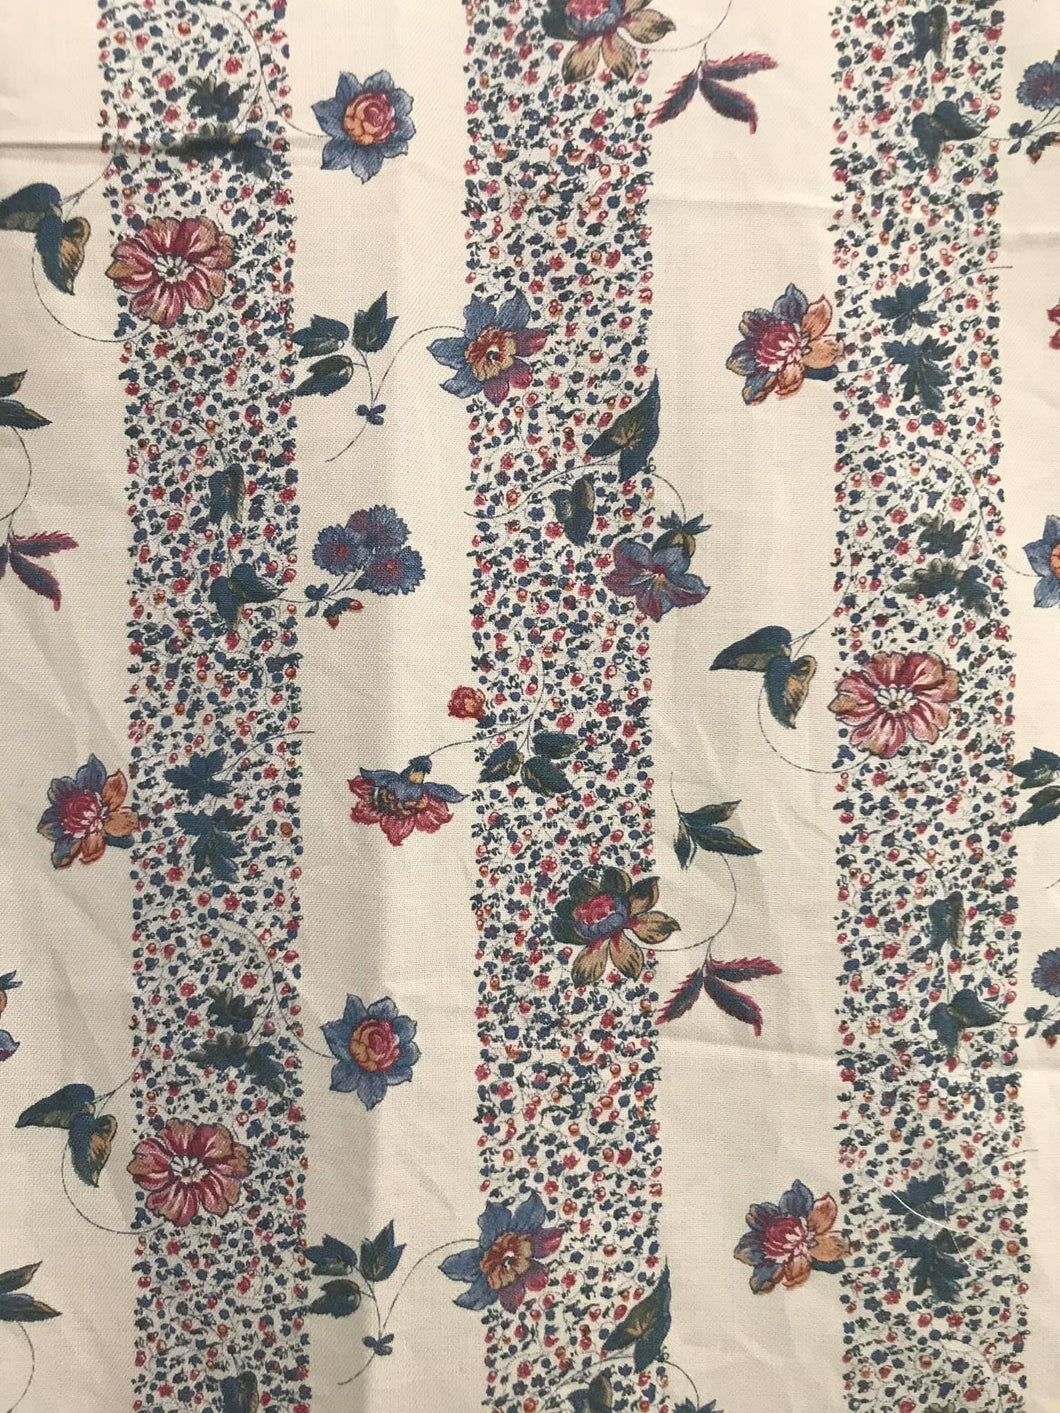 1970’s Concord Grey/Blue stripes with floral and butterflies - Cotton blend fabric